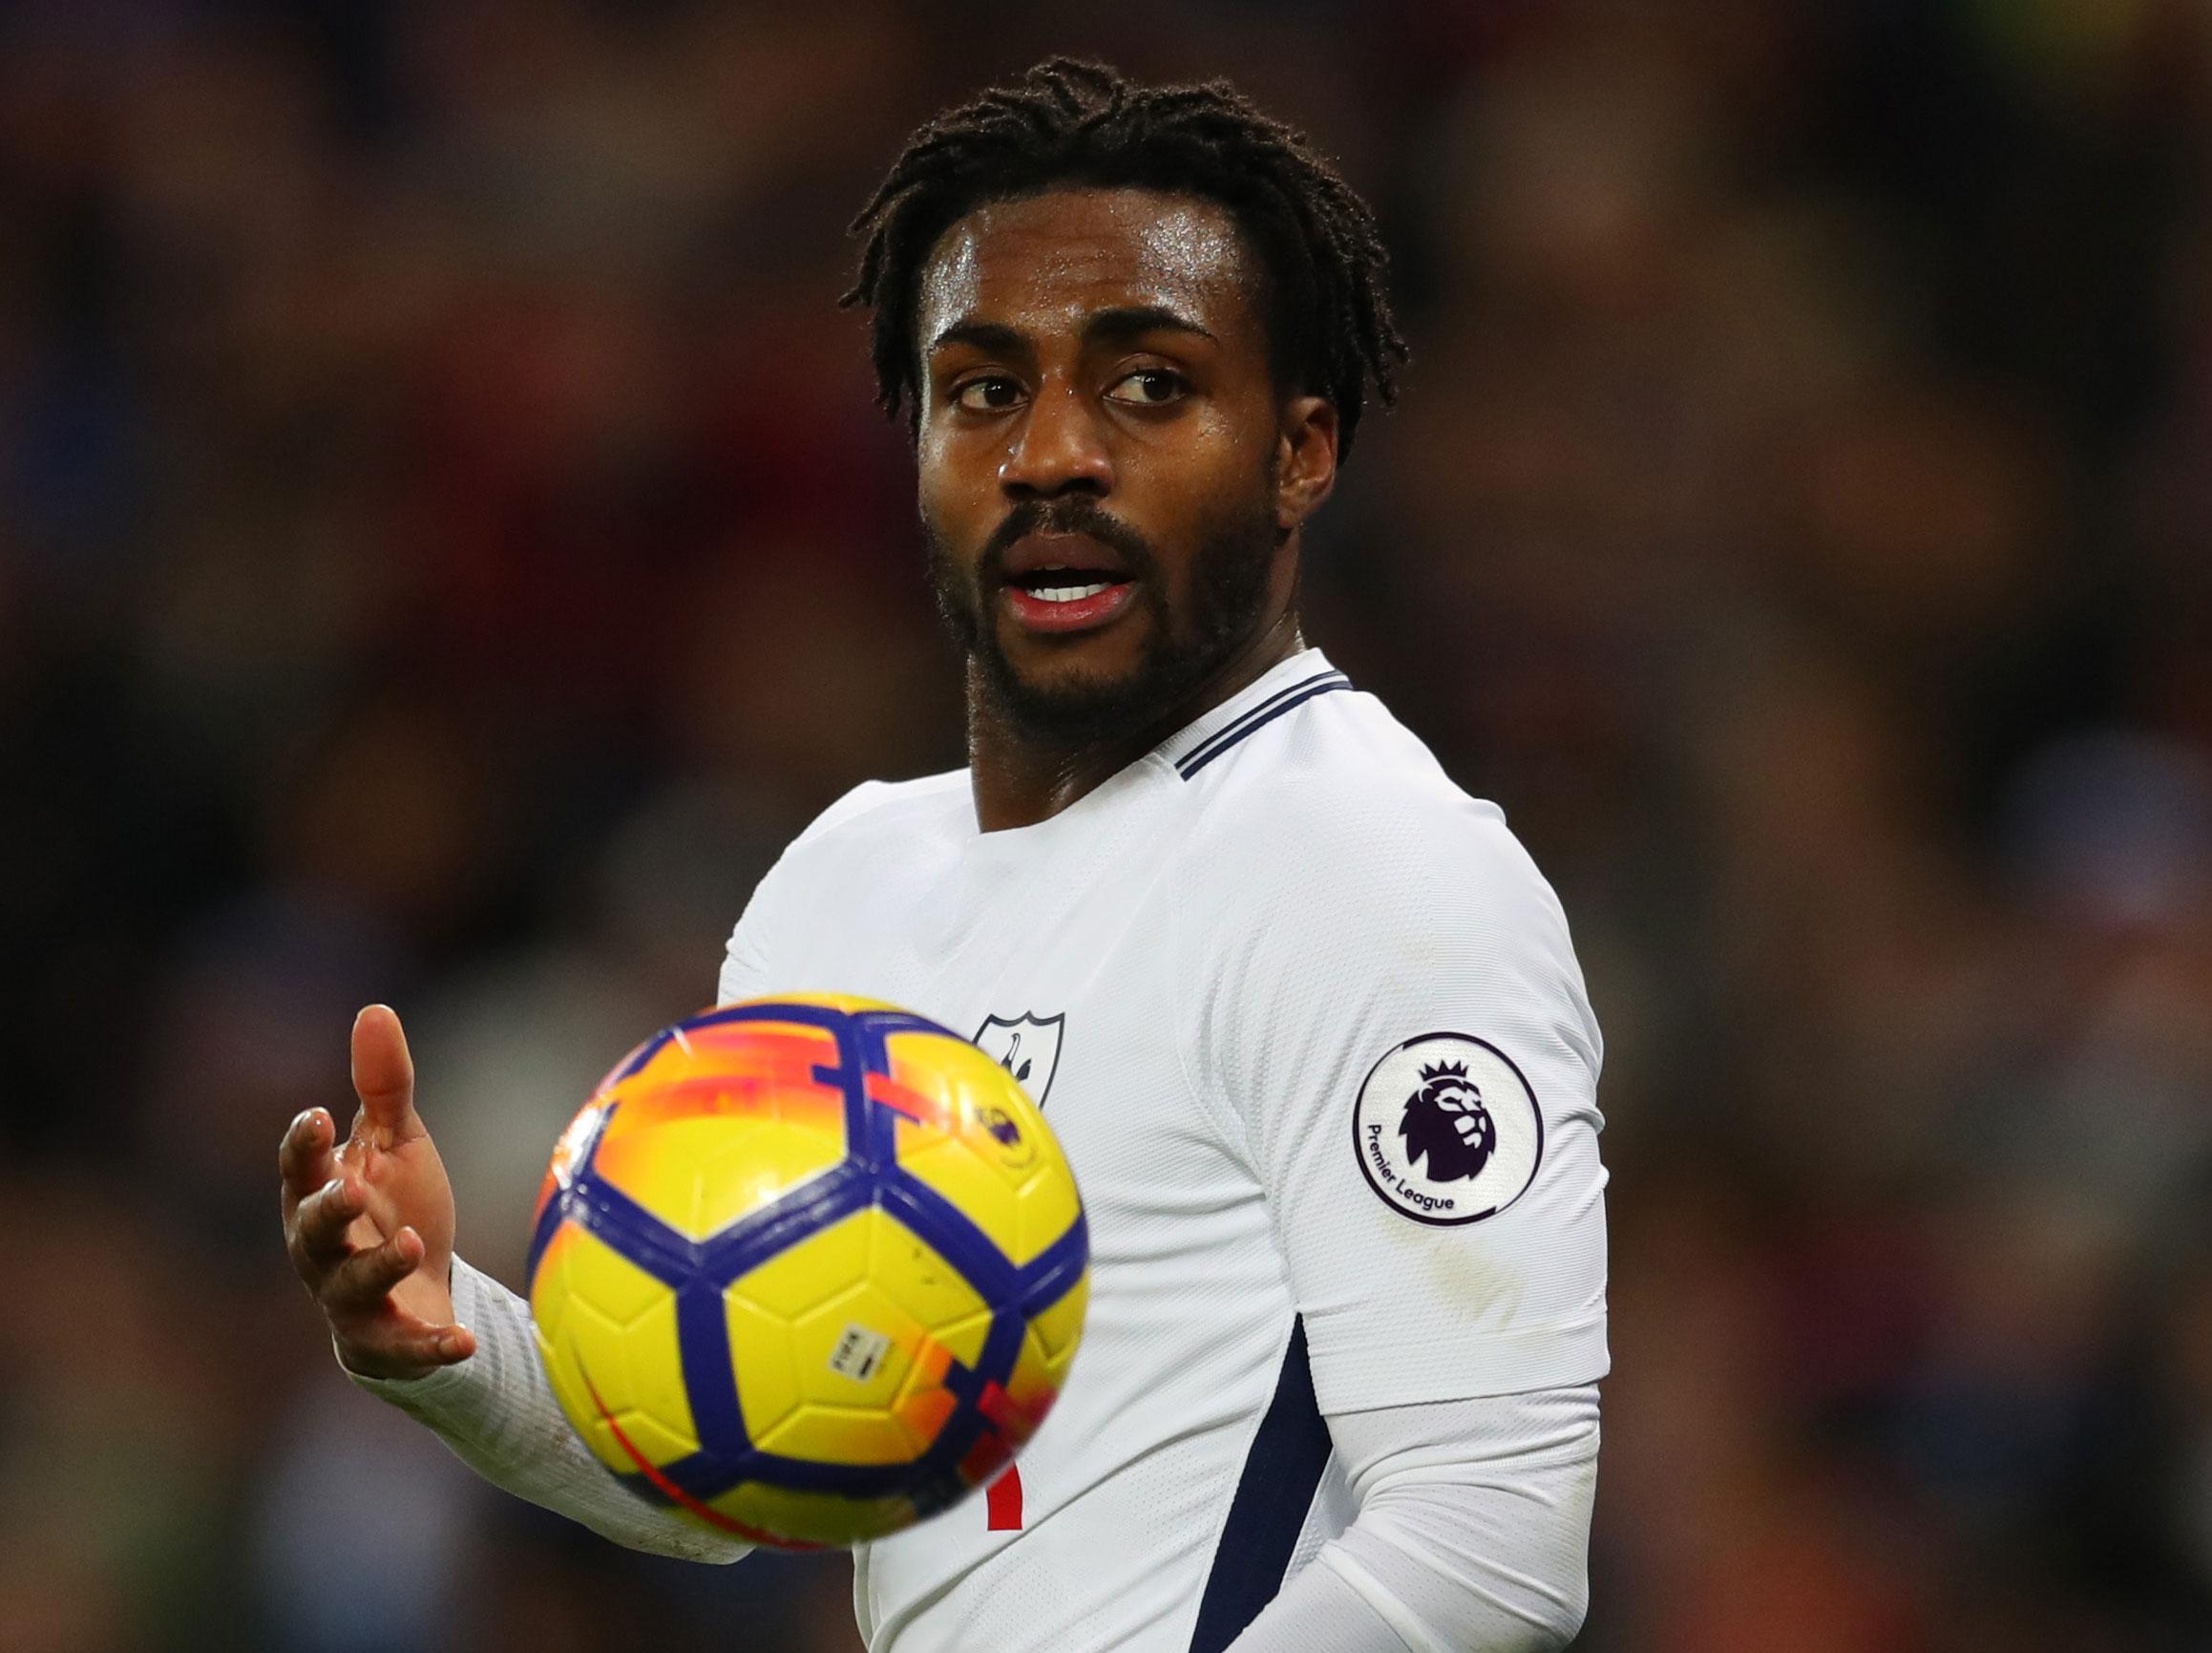 Jose Mourinho to prioritise a new full-back for Manchester United in January with Spurs&apos; Danny Rose his top target